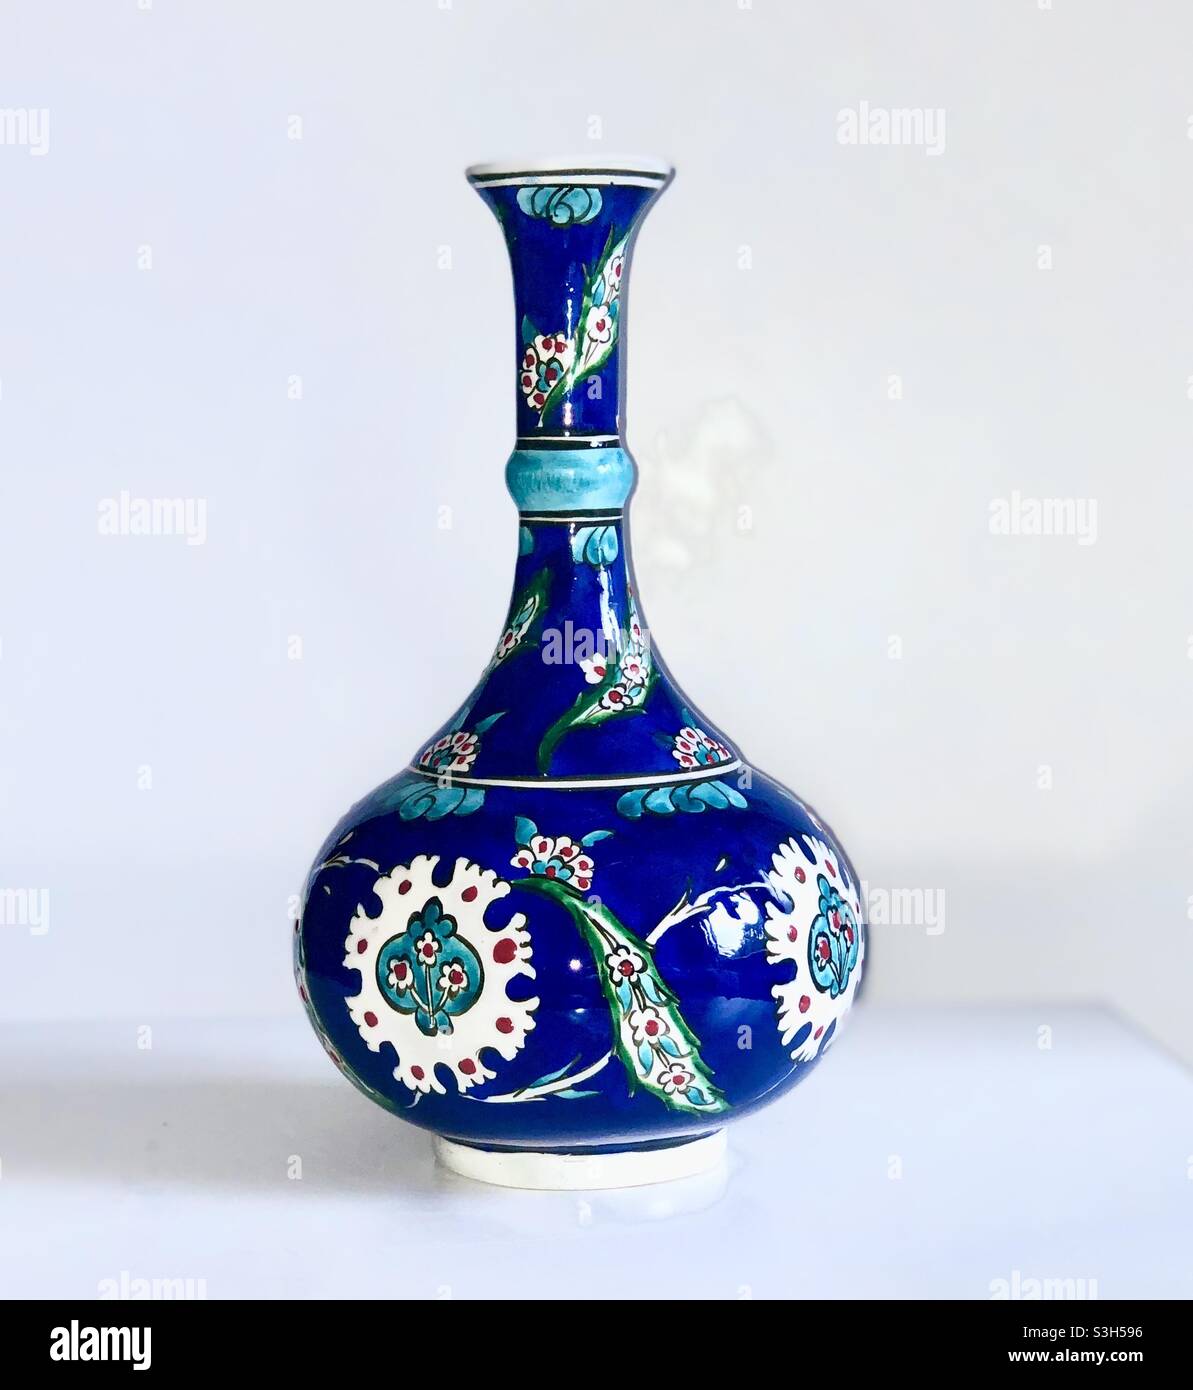 Page 2 - Vase Painted Porcelain High Resolution Stock Photography and  Images - Alamy